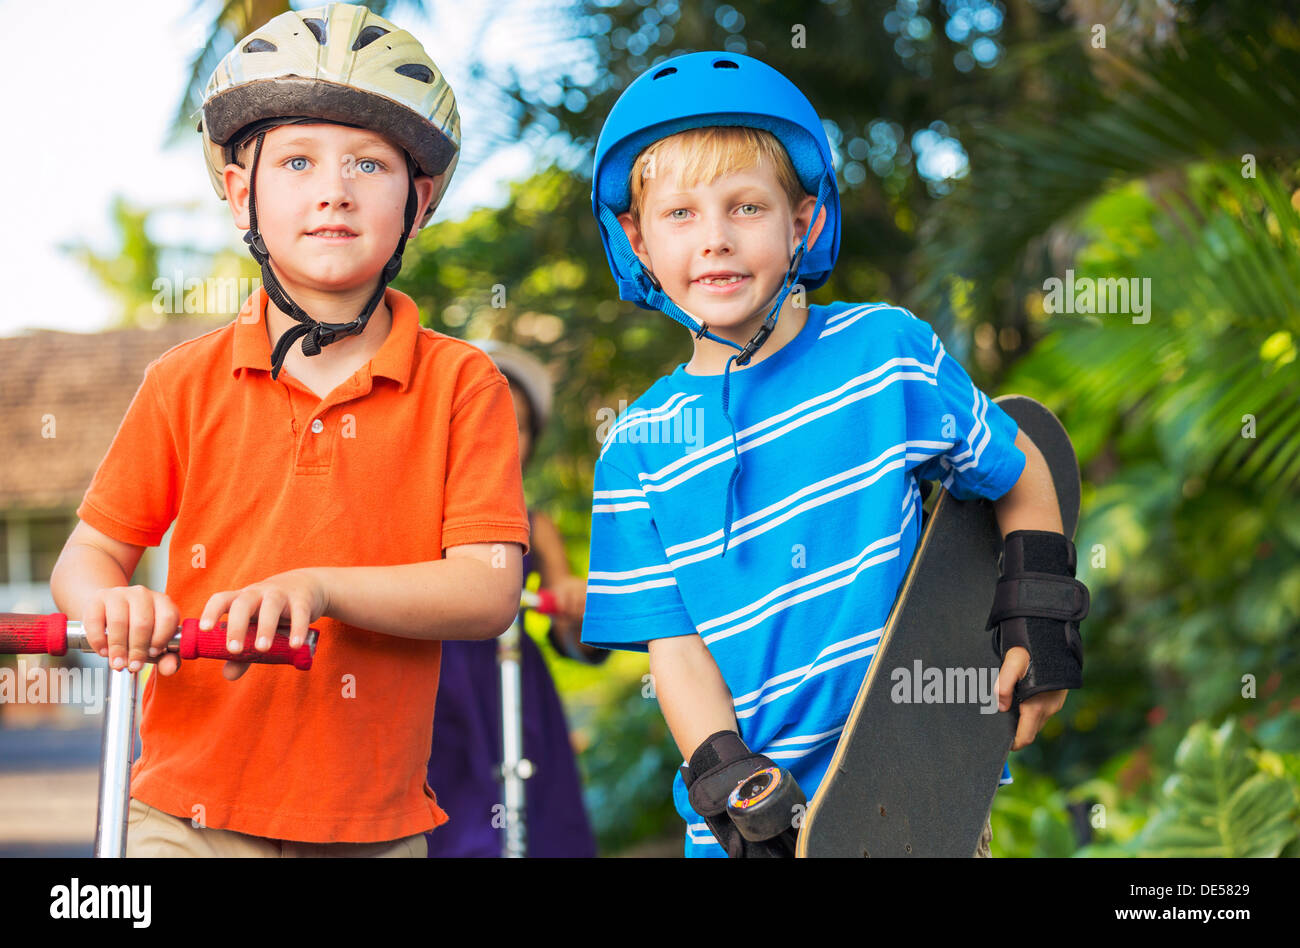 Group of Neighborhood Kids with Skateboards and Scooters Playing Stock Photo